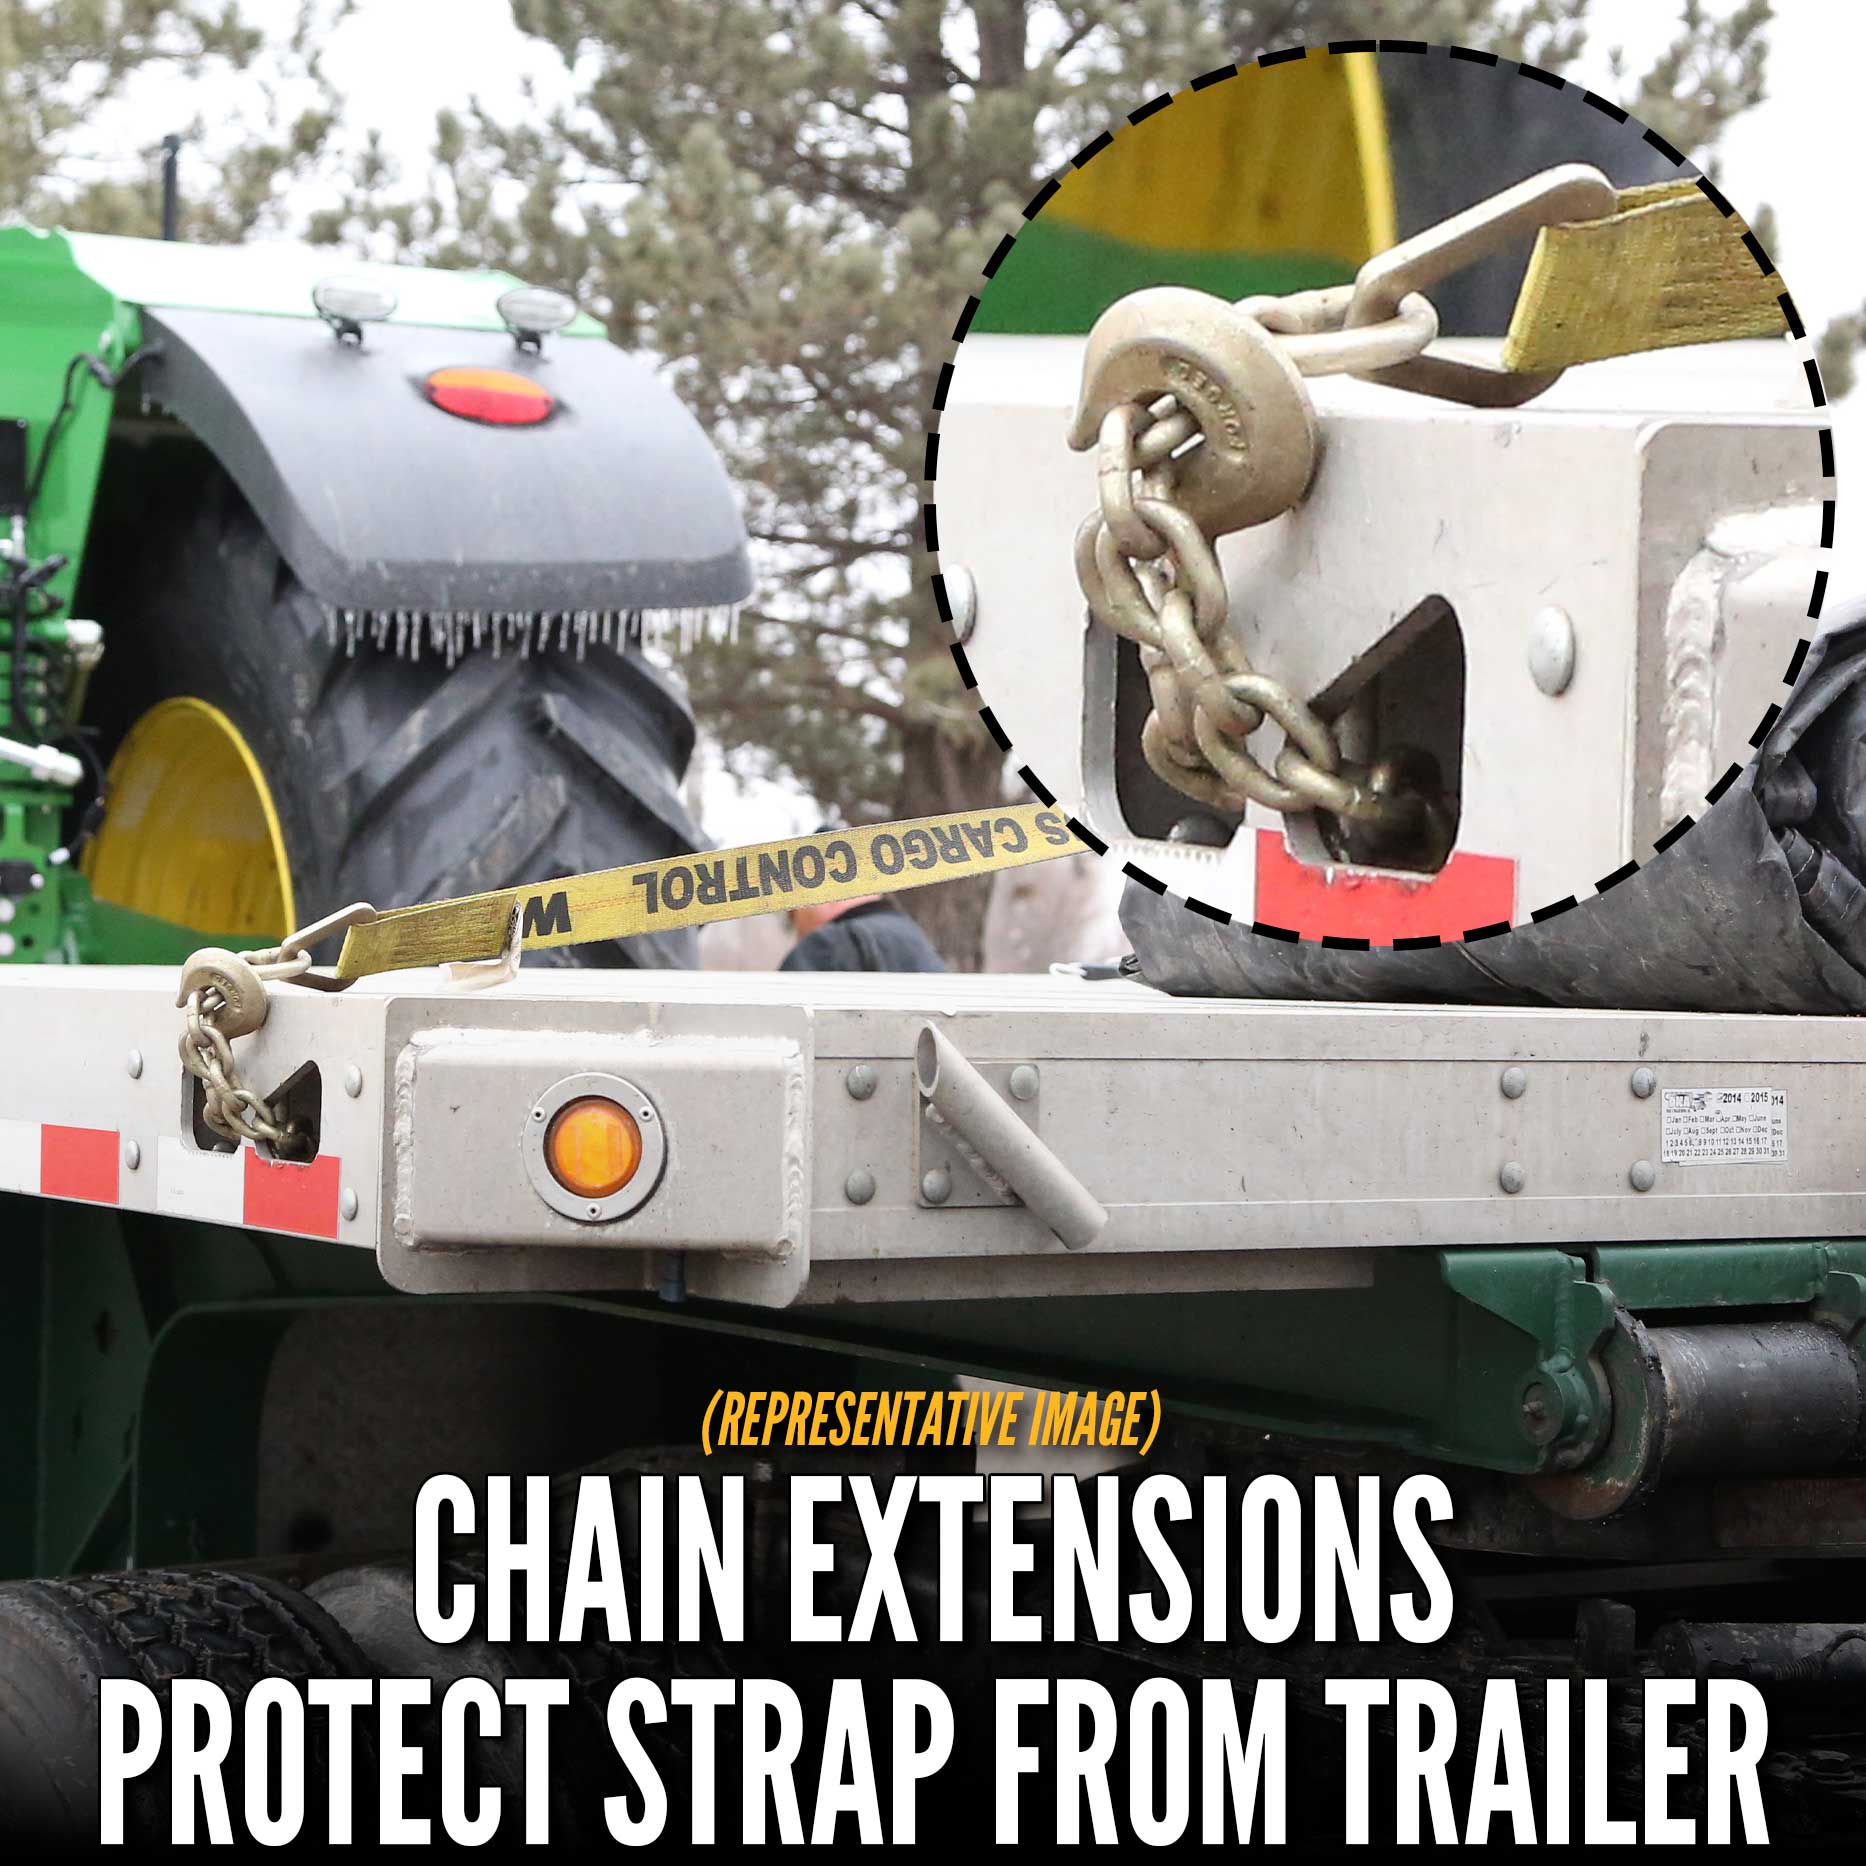 3-x-40-winch-strap-with-chain-extension-image-4